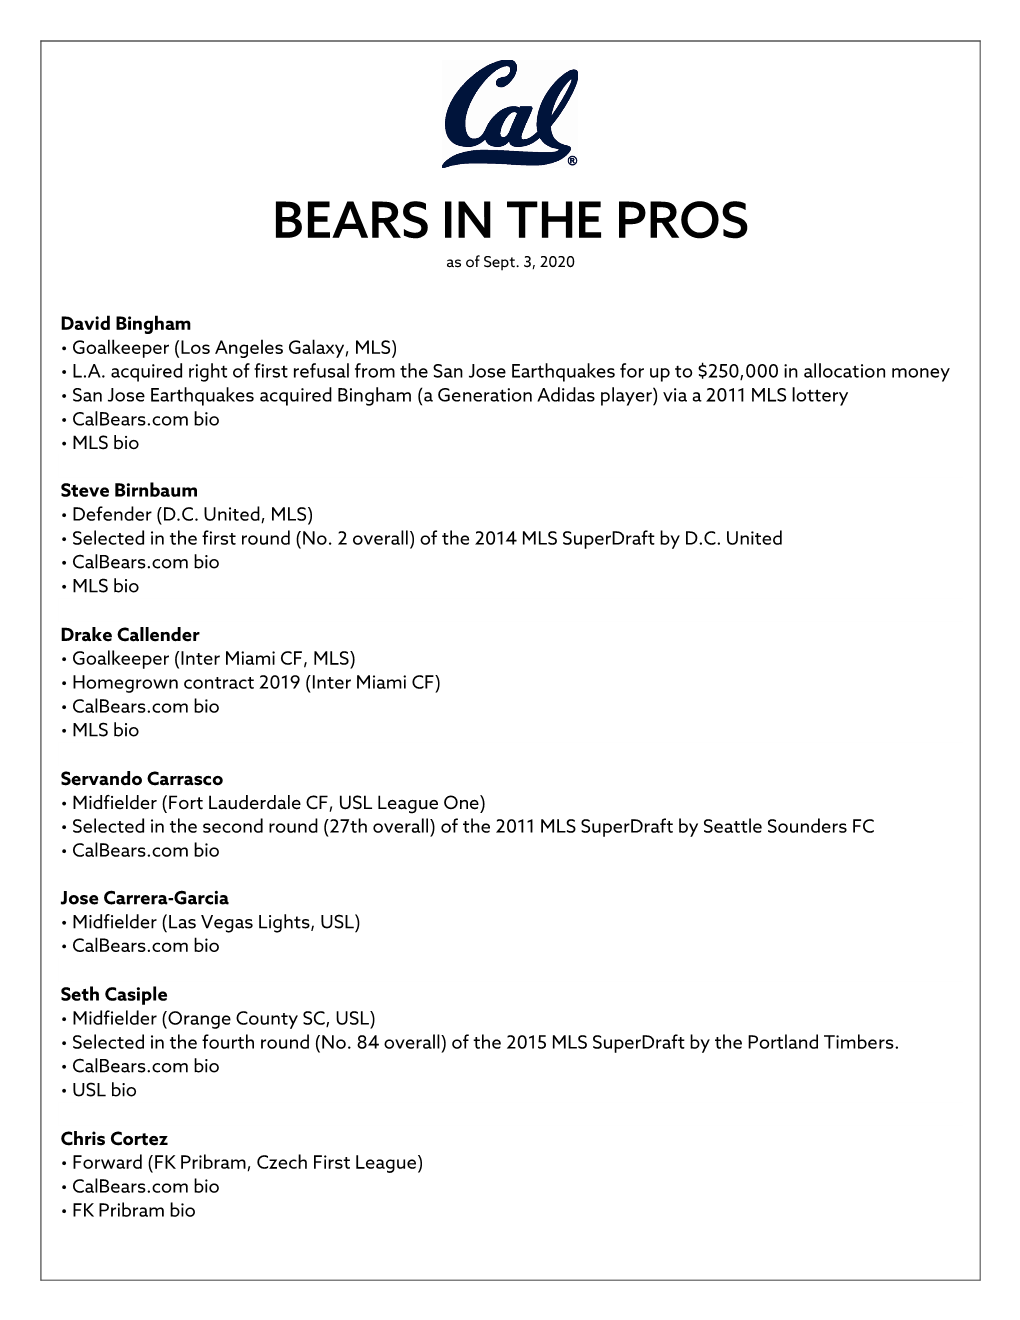 BEARS in the PROS As of Sept